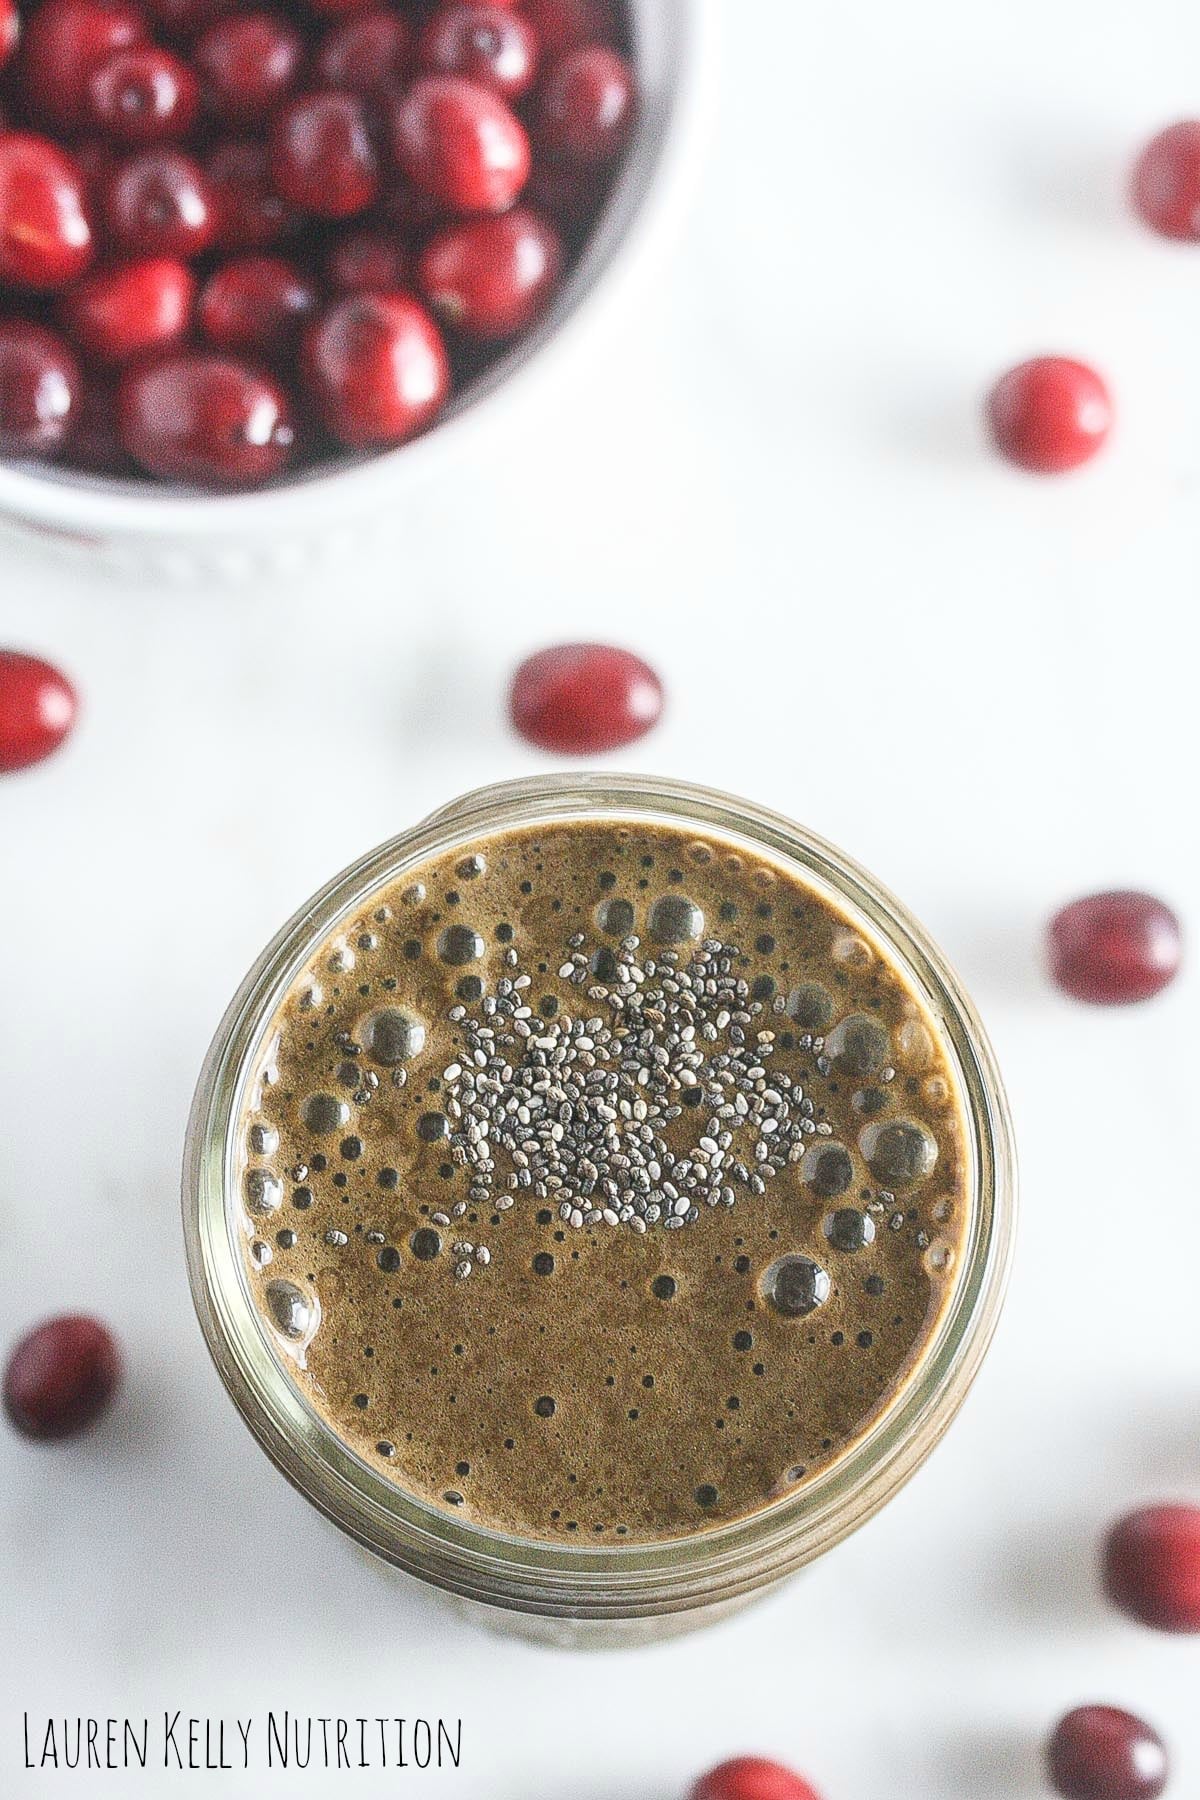 This Chocolate Cranberry Smoothie is packed with vitamins and antioxidants and is vegan, gluten-free and sugar-free! www.laurenkellynutrition.com